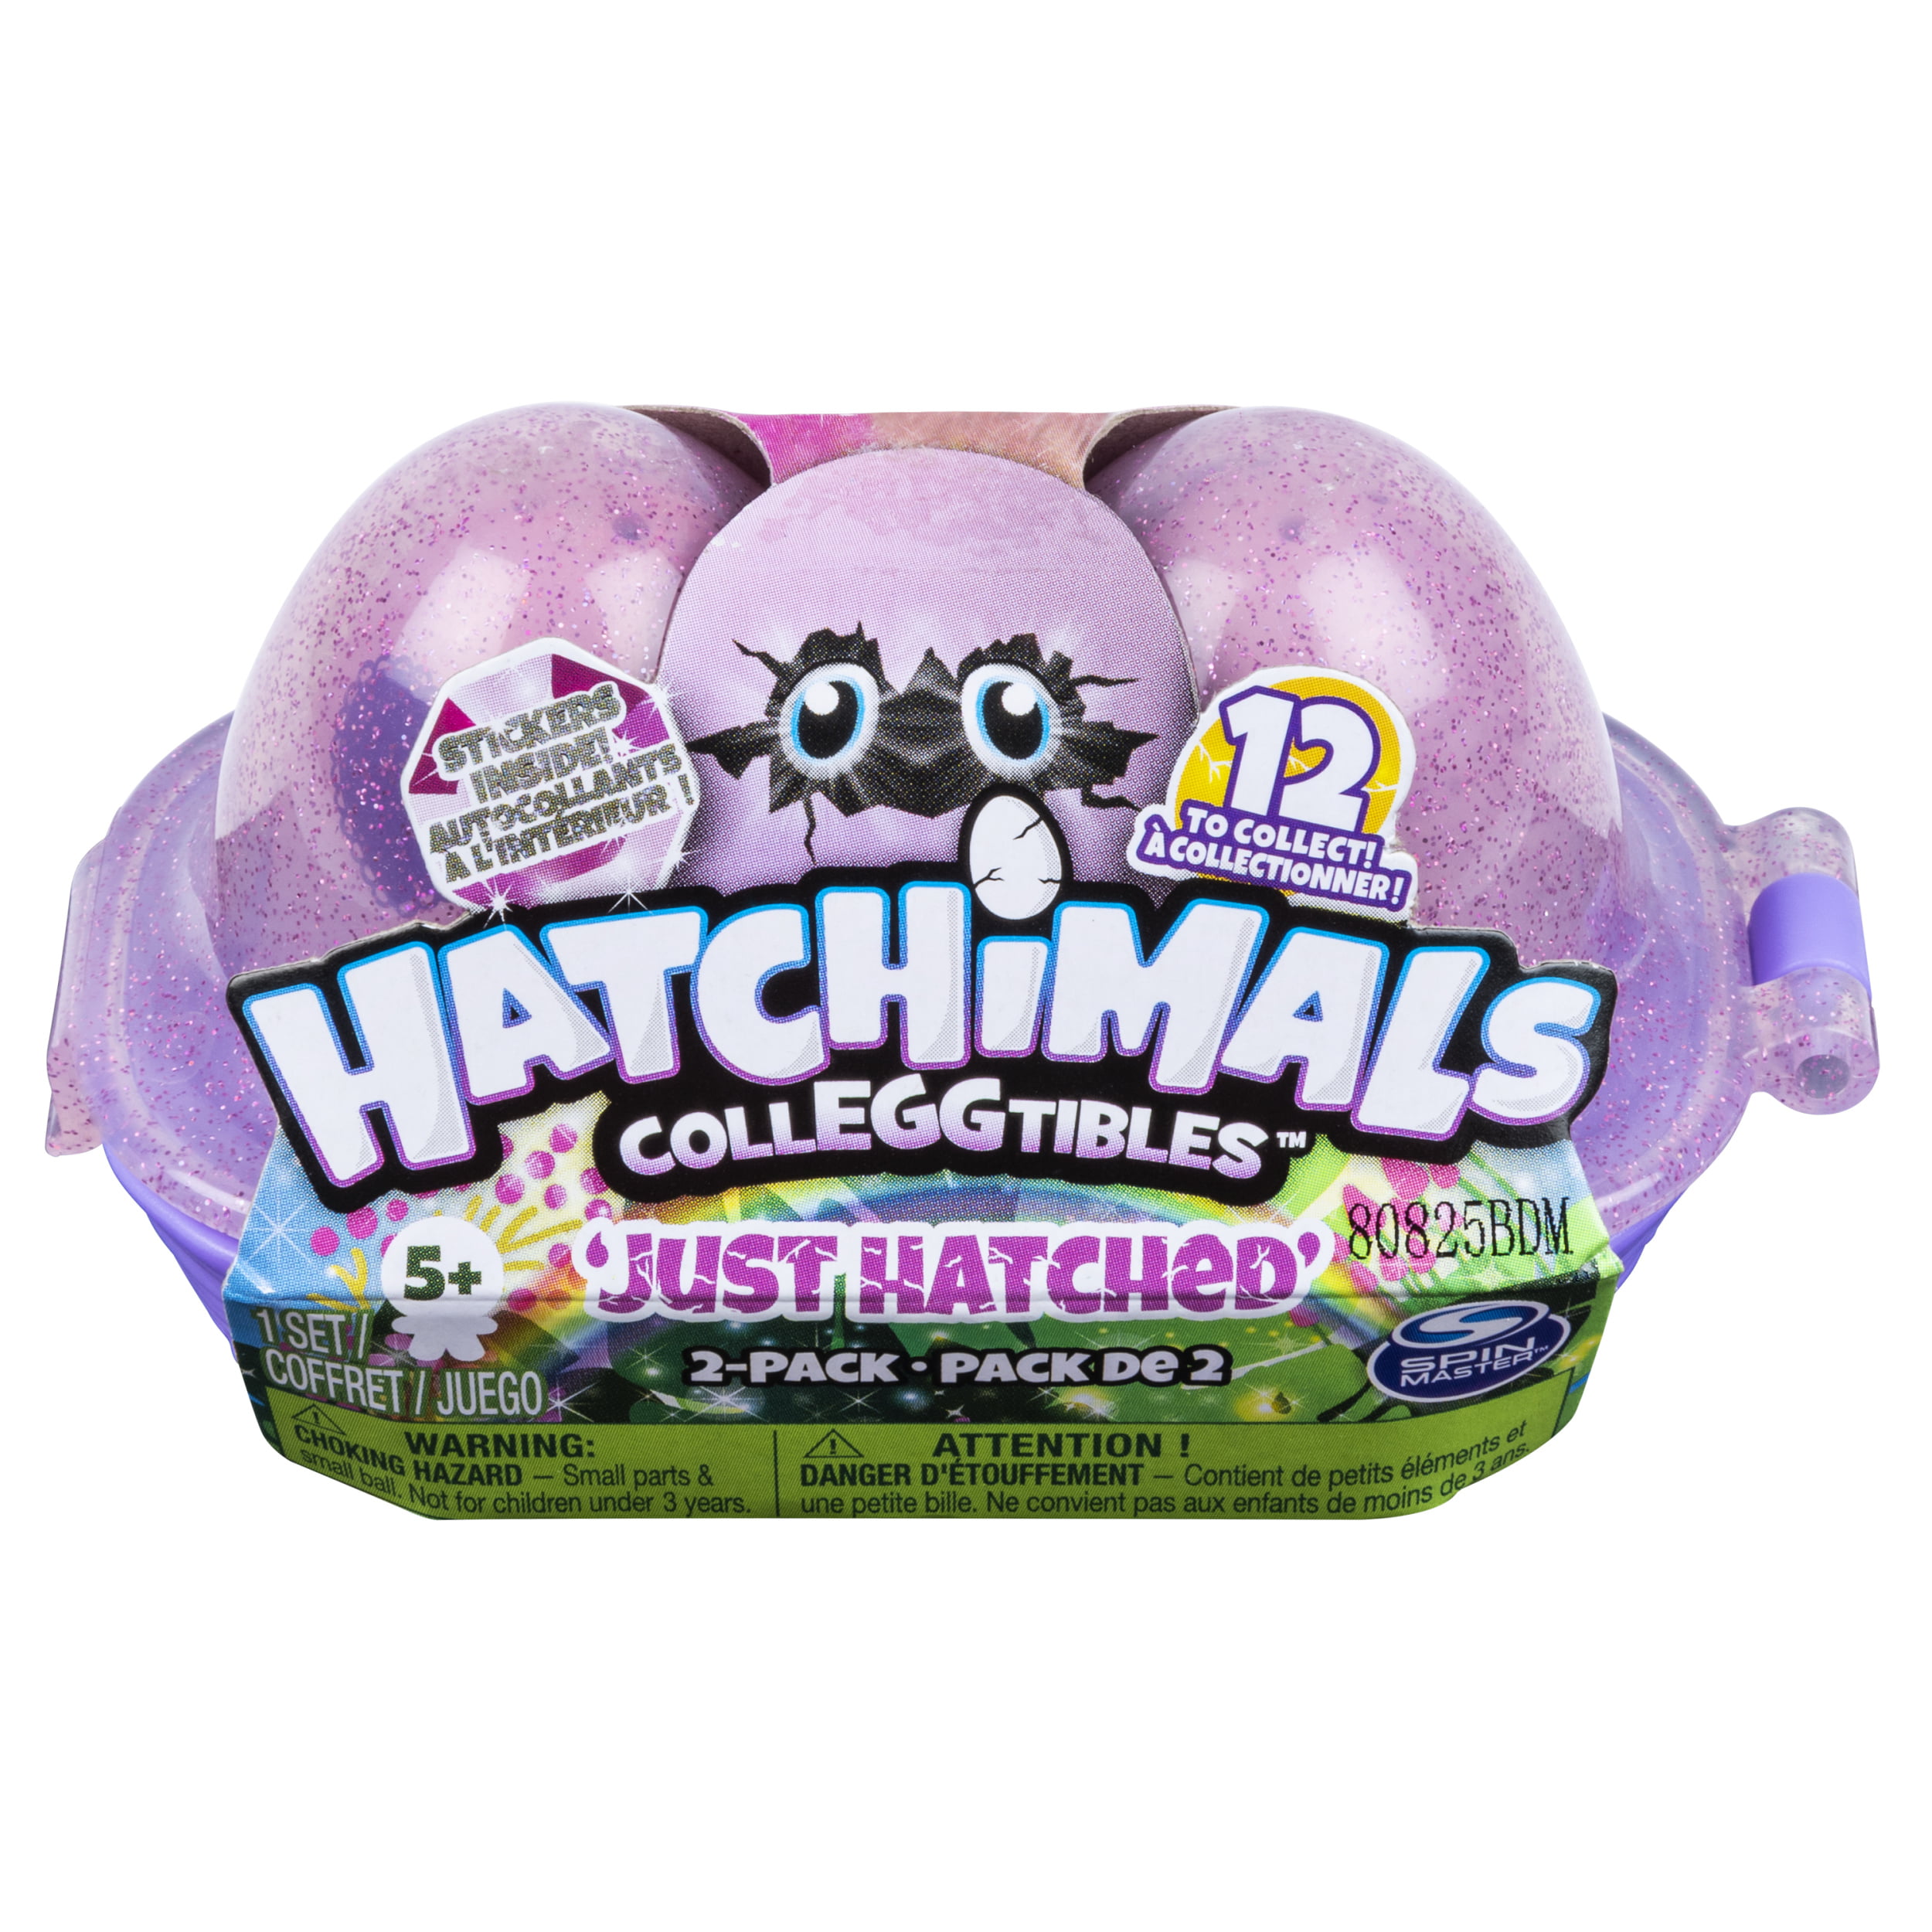 Details about   Hatchimals COLLEGGTIBLES JUST HATCHED COMPLETE SET UNHATCHED CARTONS 